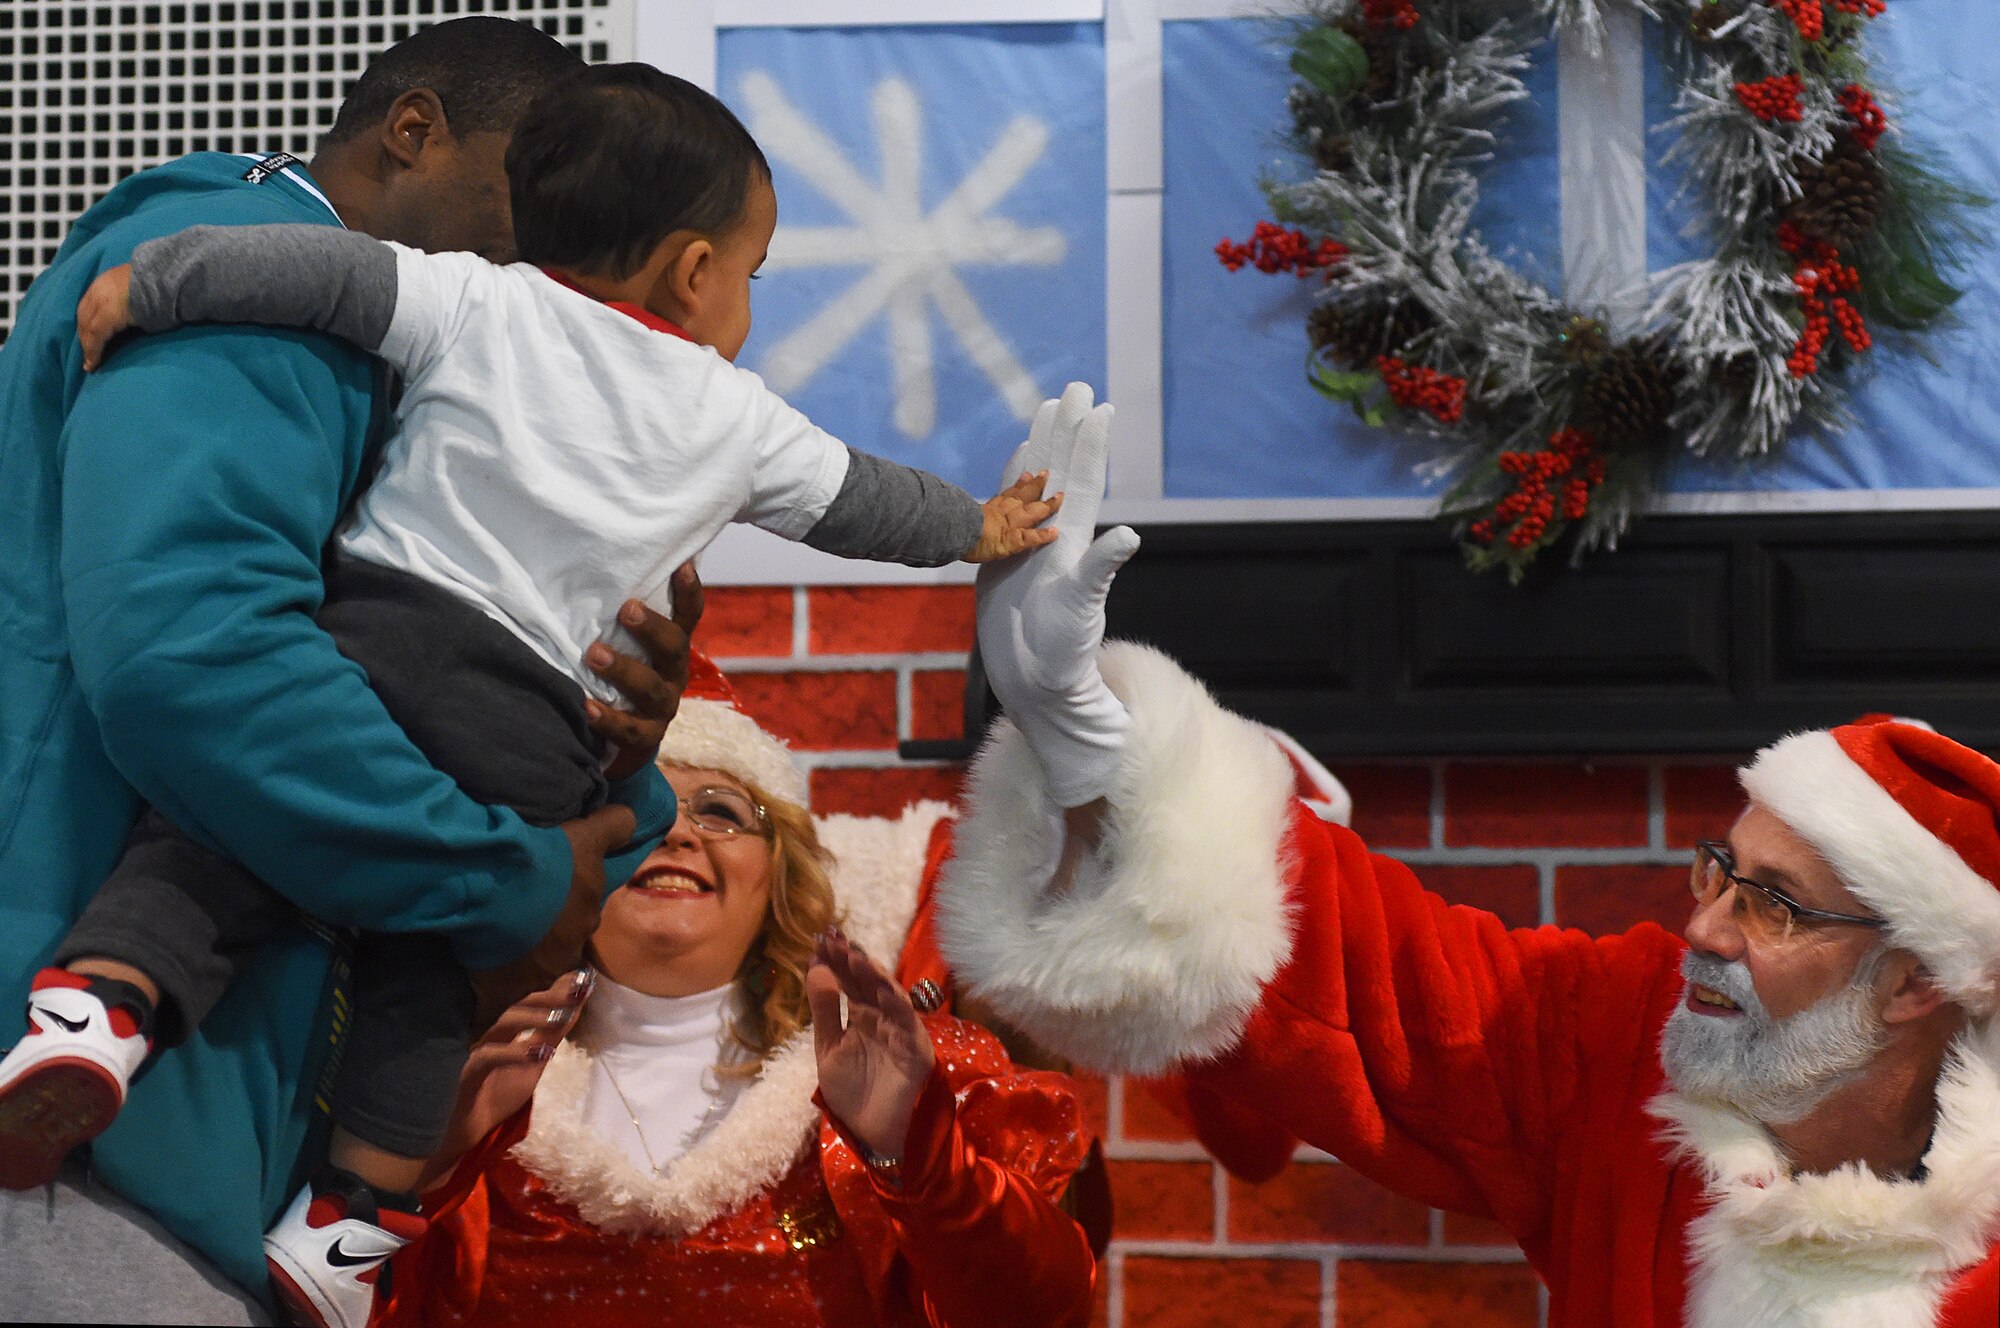 Solomon Gray, 1, son of Tech Sgts. Amy Gray, 90th Force Support Squadron, and Brandon Gray, 90th Civil Engineer Squadron, gives Santa Claus a high-five as Mrs. Claus looks on in the Fall Hall Community Center on F.E. Warren Air Force Base, Wyo. Dec. 4, 2015. The Grays were attending the base's annual tree lighting ceremony. (U.S. Air Force photo by R.J. Oriez)